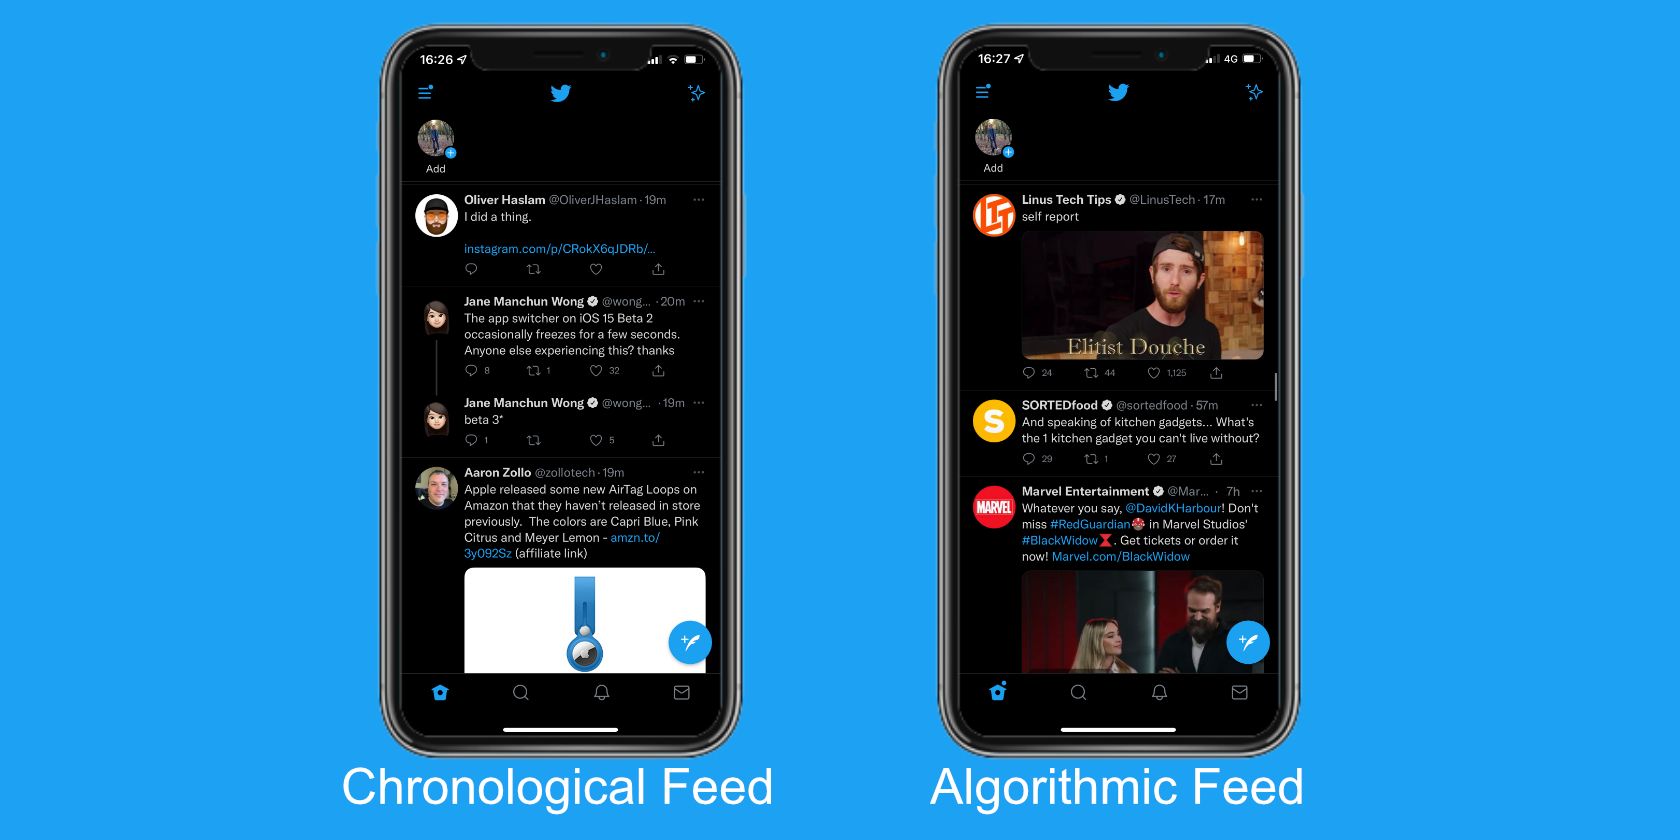 A comparison between chronological and algorithmic feeds on Twitter.